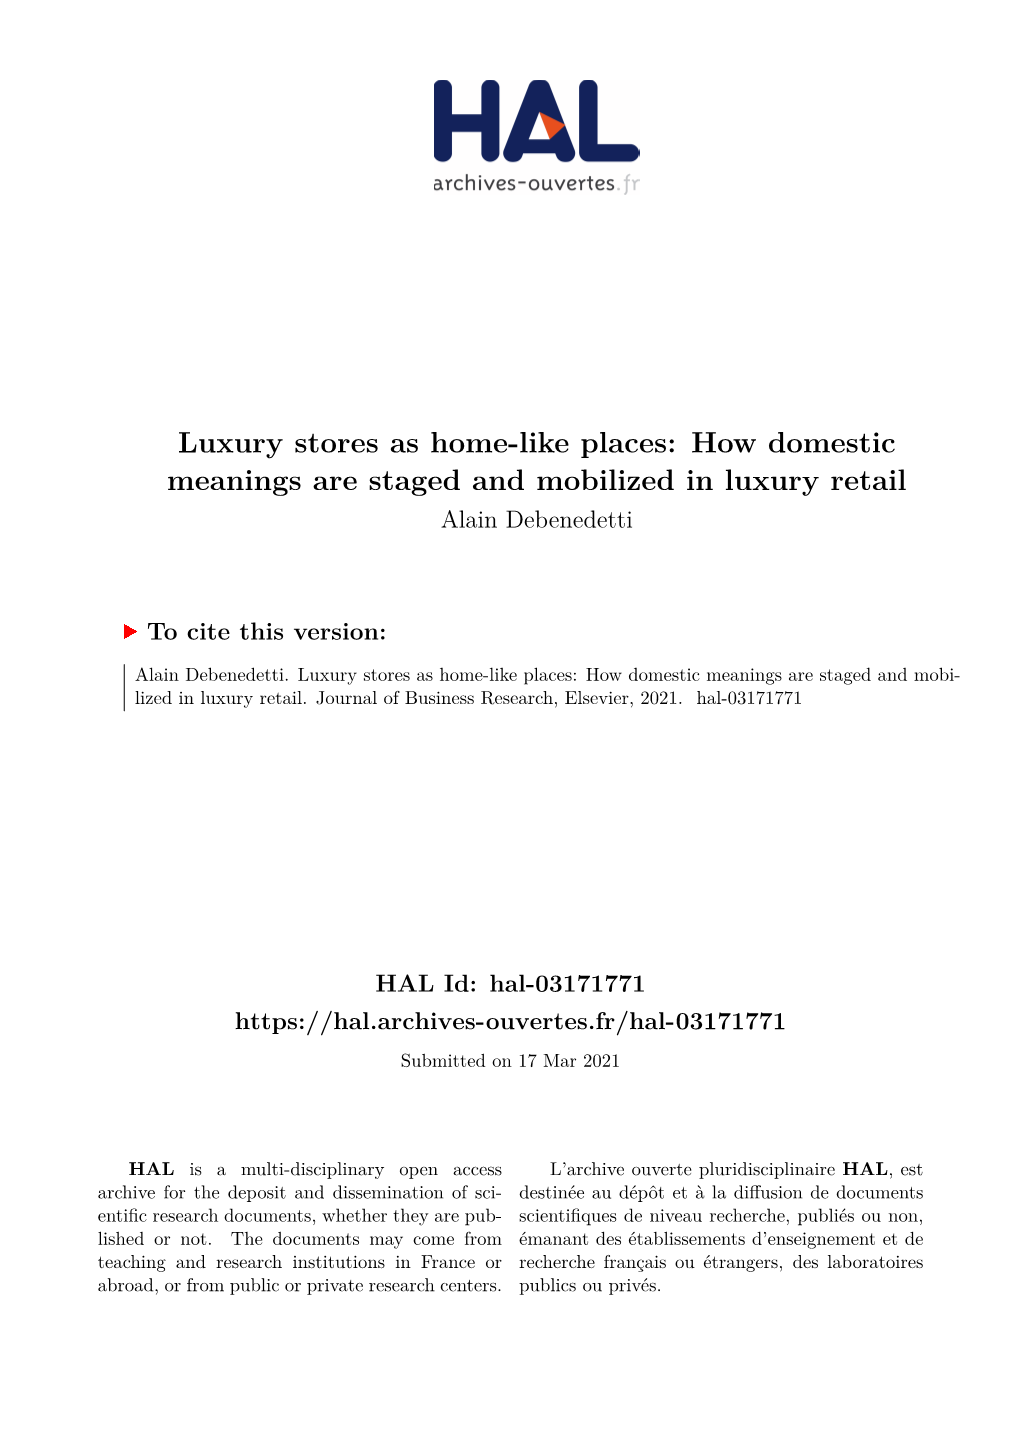 How Domestic Meanings Are Staged and Mobilized in Luxury Retail Alain Debenedetti